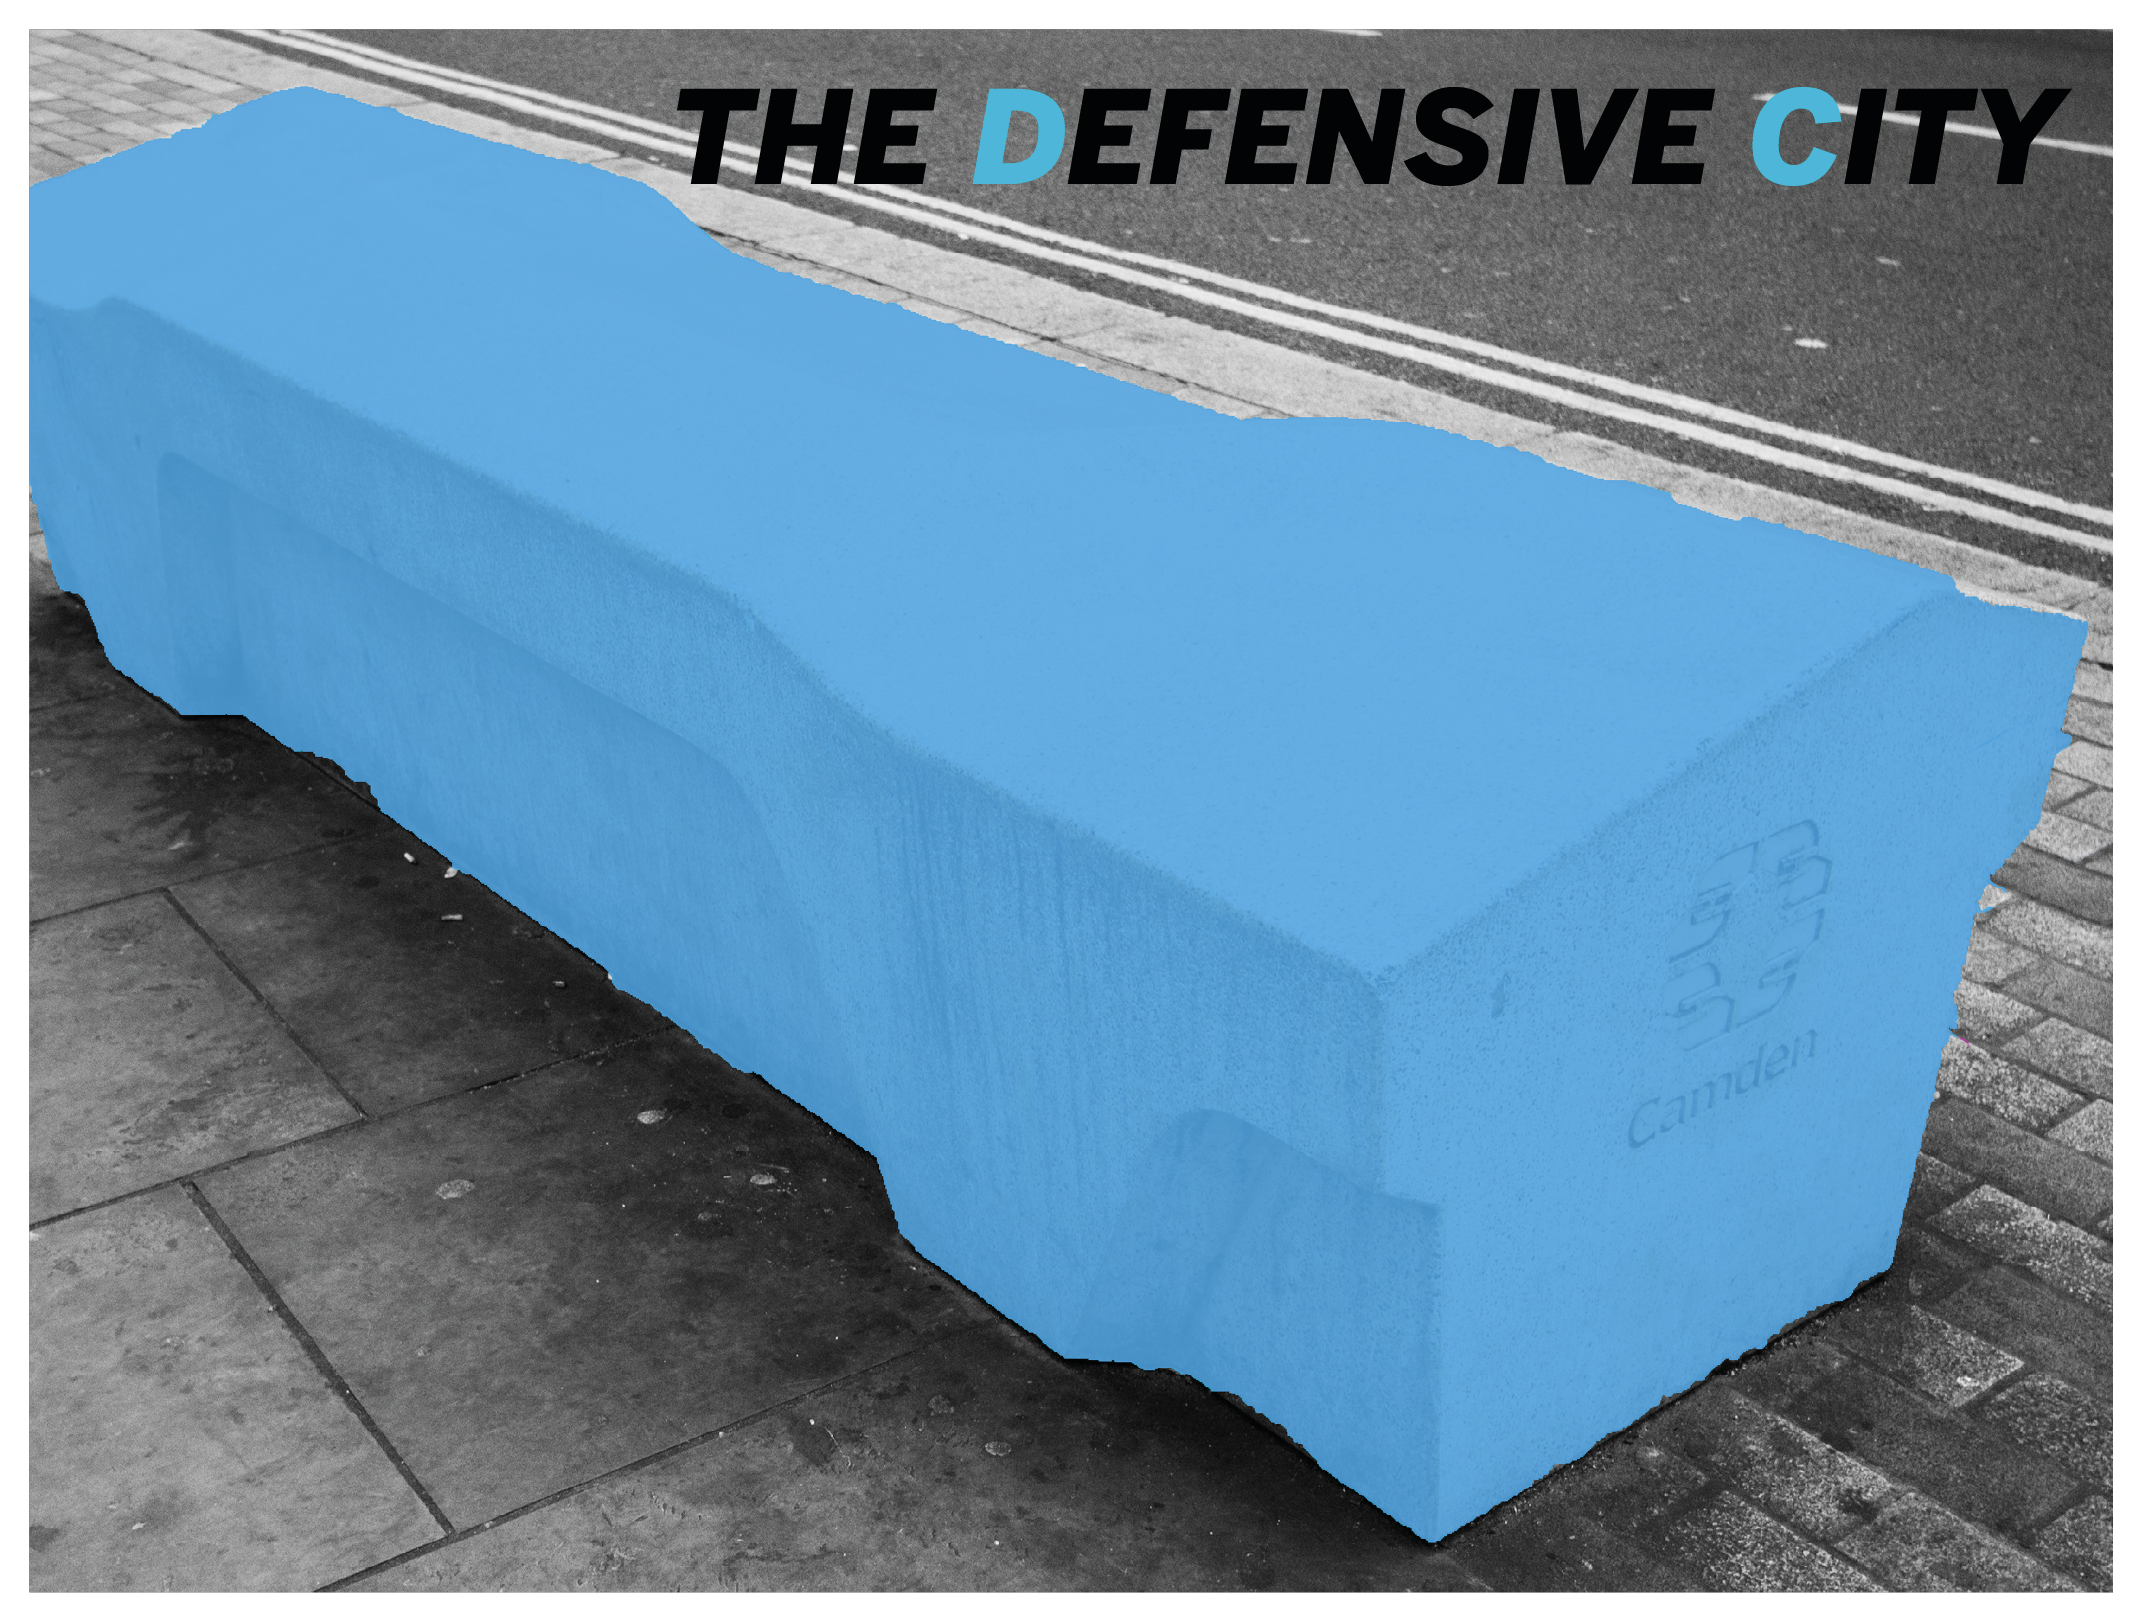 The Defensive City